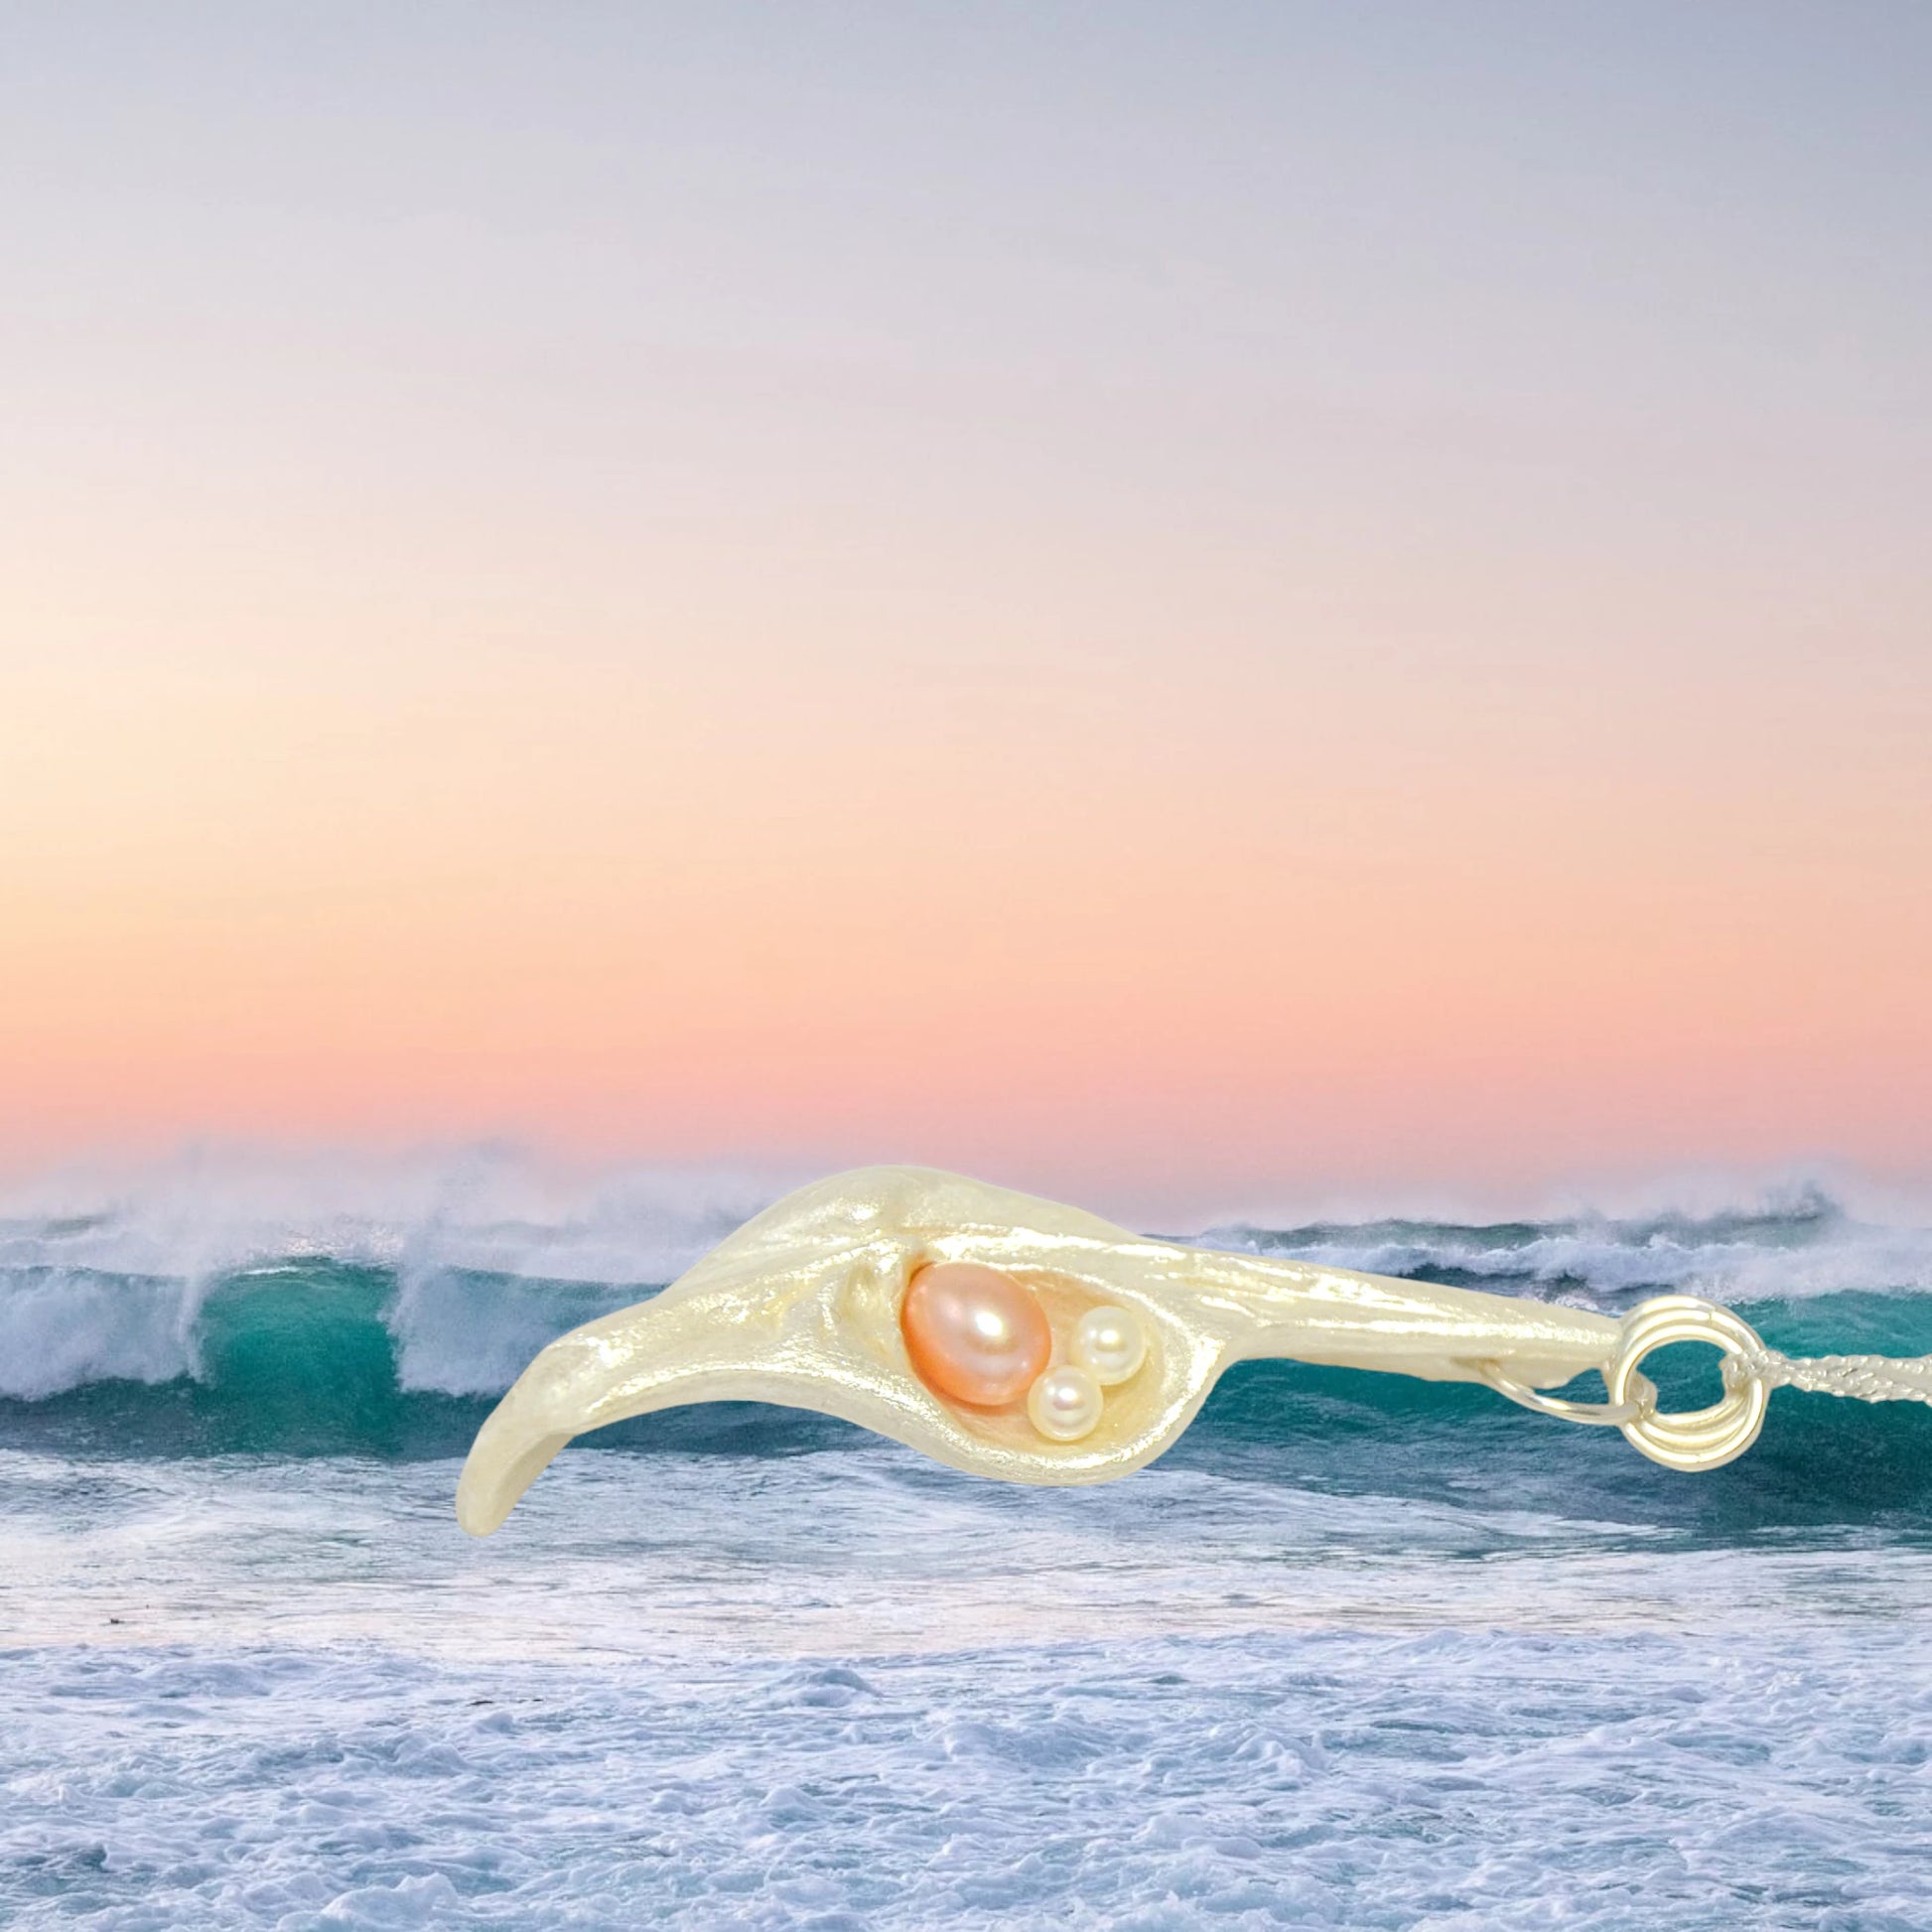 This natural seashell pendant has a real 7-8mm pink freshwater pearl and two baby pearls. The pendant is shown on its side with the ocean waves behind it.